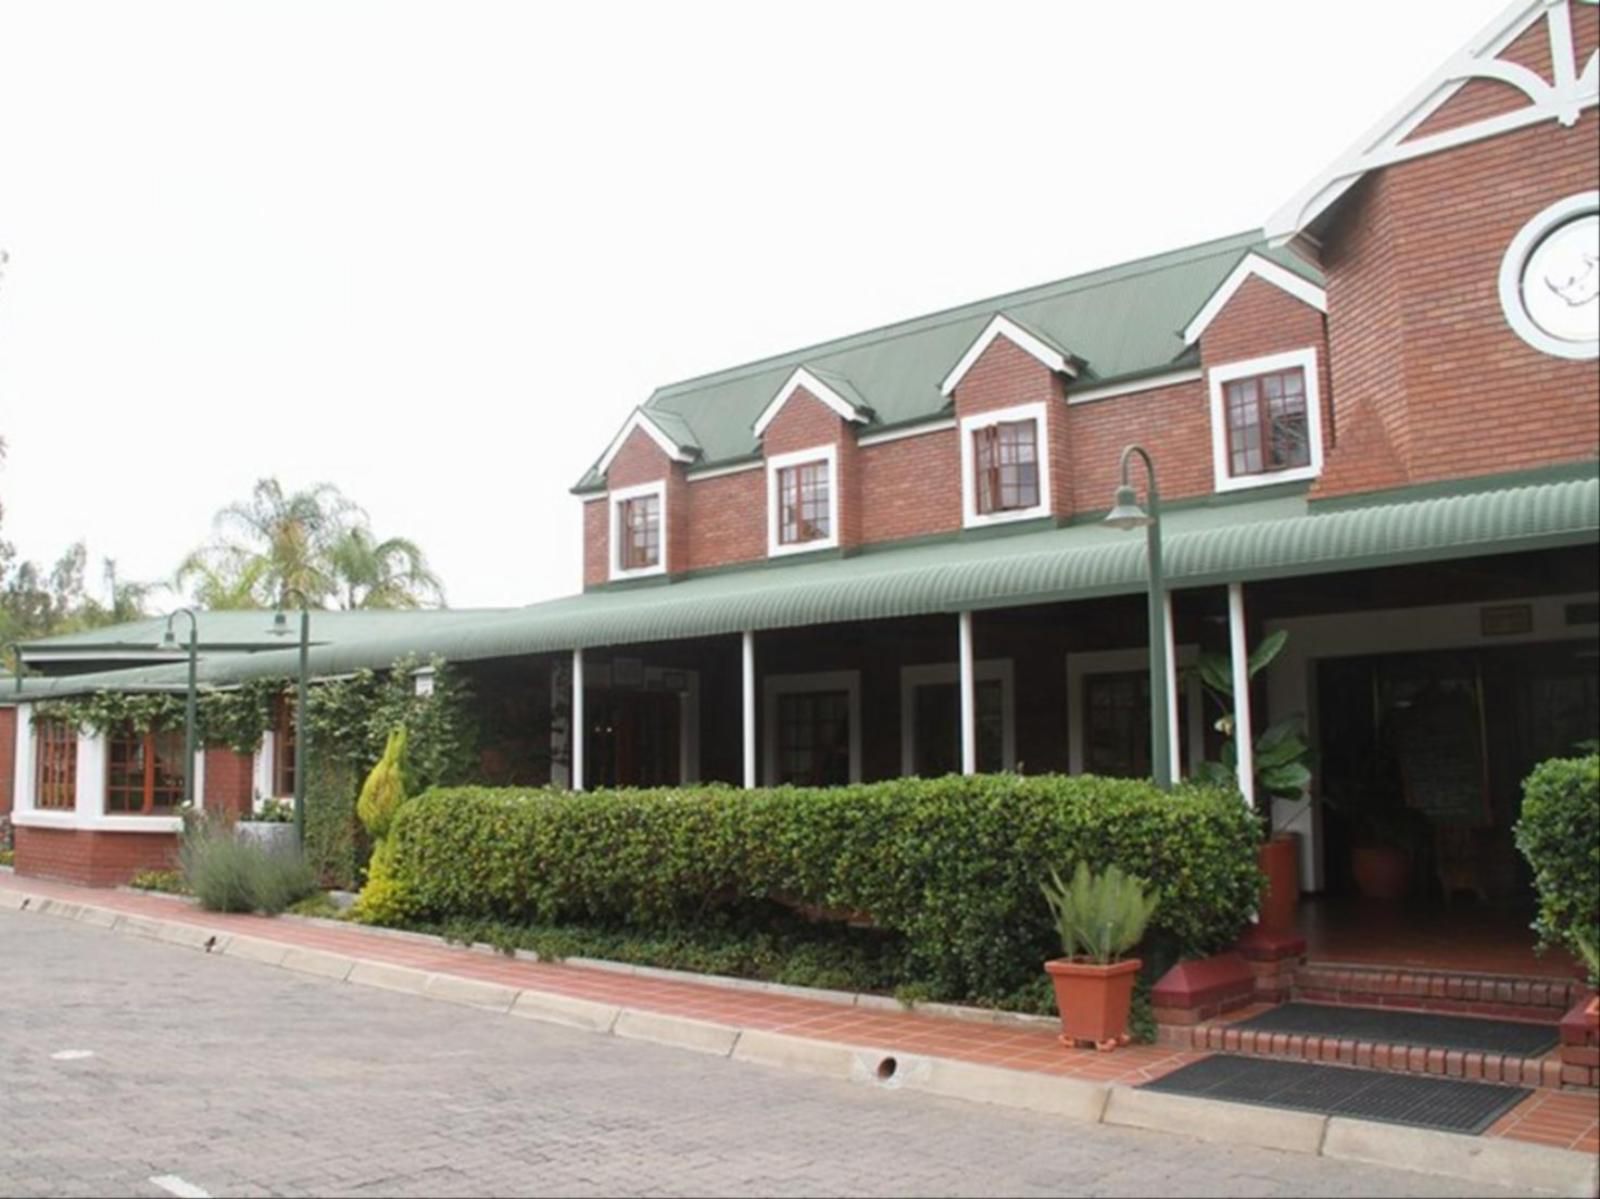 Pietersburg Club Polokwane Central Polokwane Pietersburg Limpopo Province South Africa House, Building, Architecture, Palm Tree, Plant, Nature, Wood